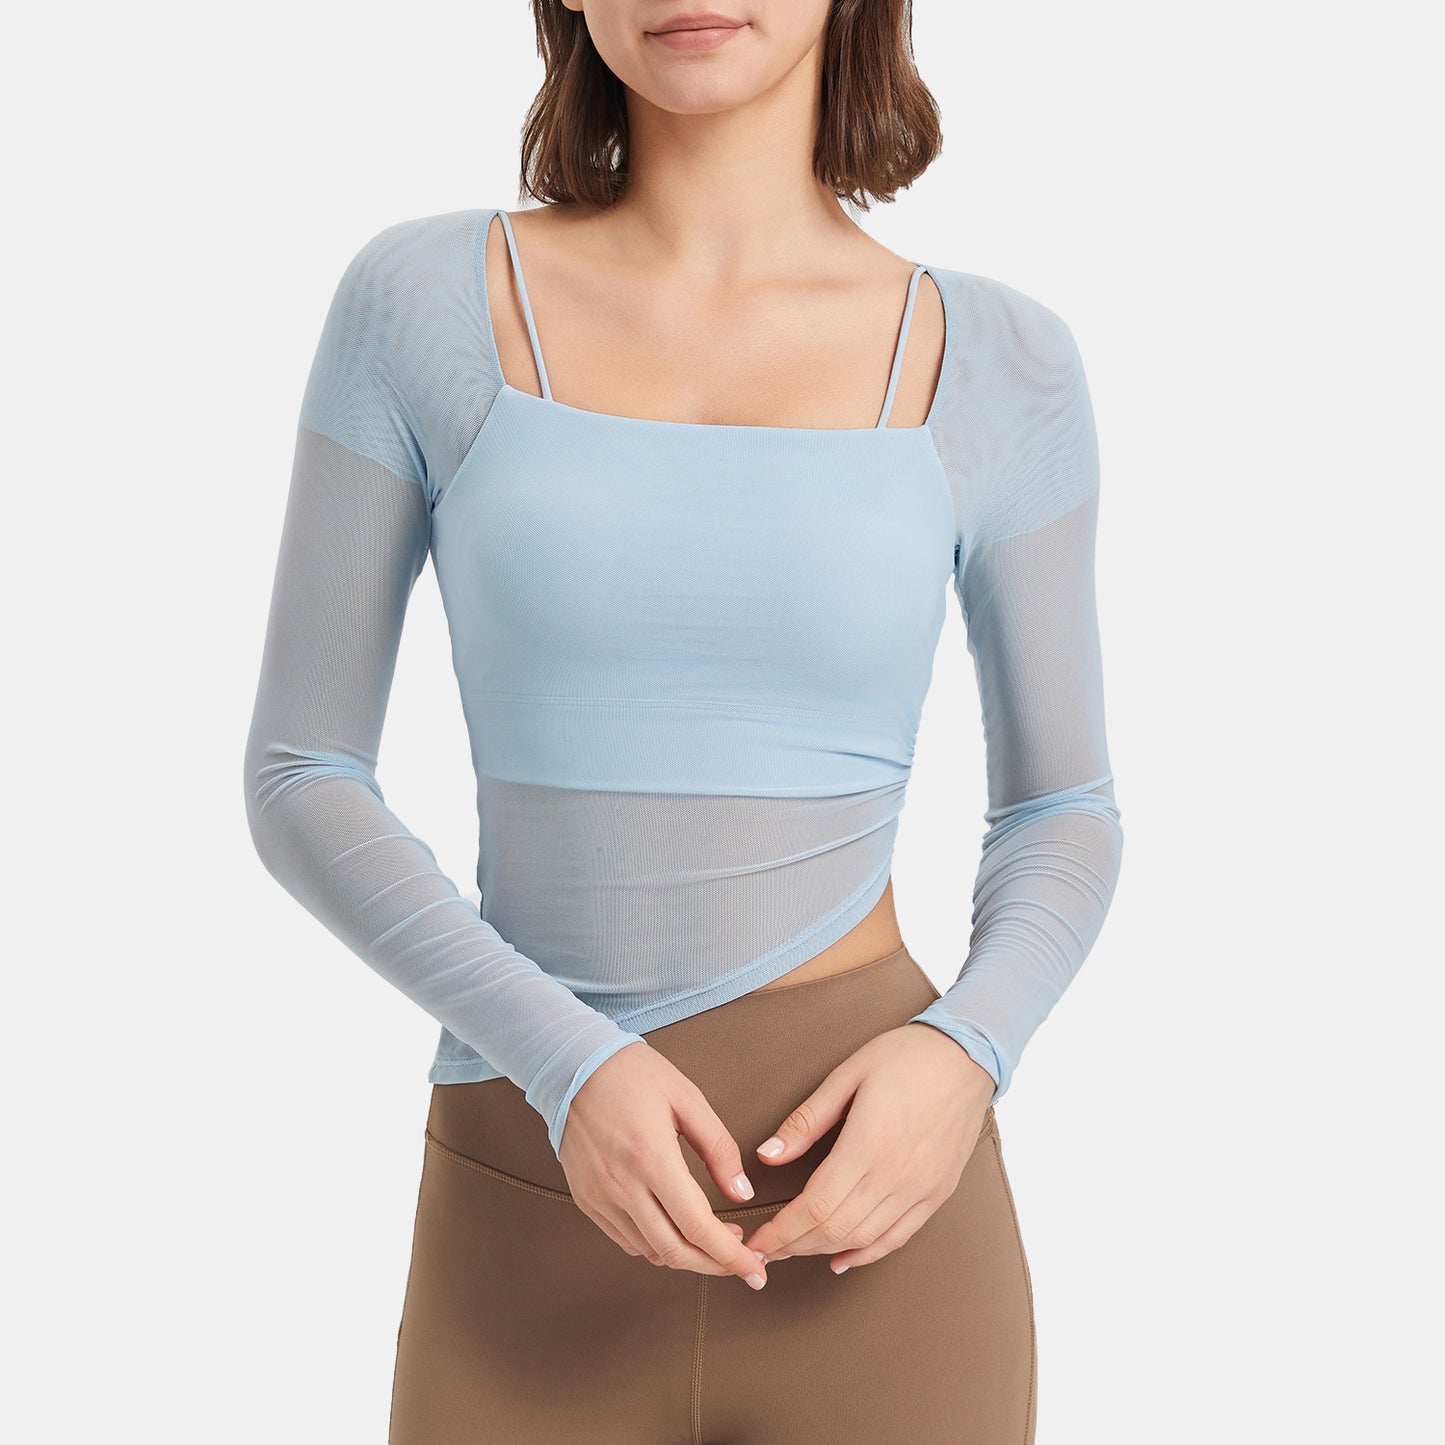 Mesh Square Neck Long Sleeve Sports Top